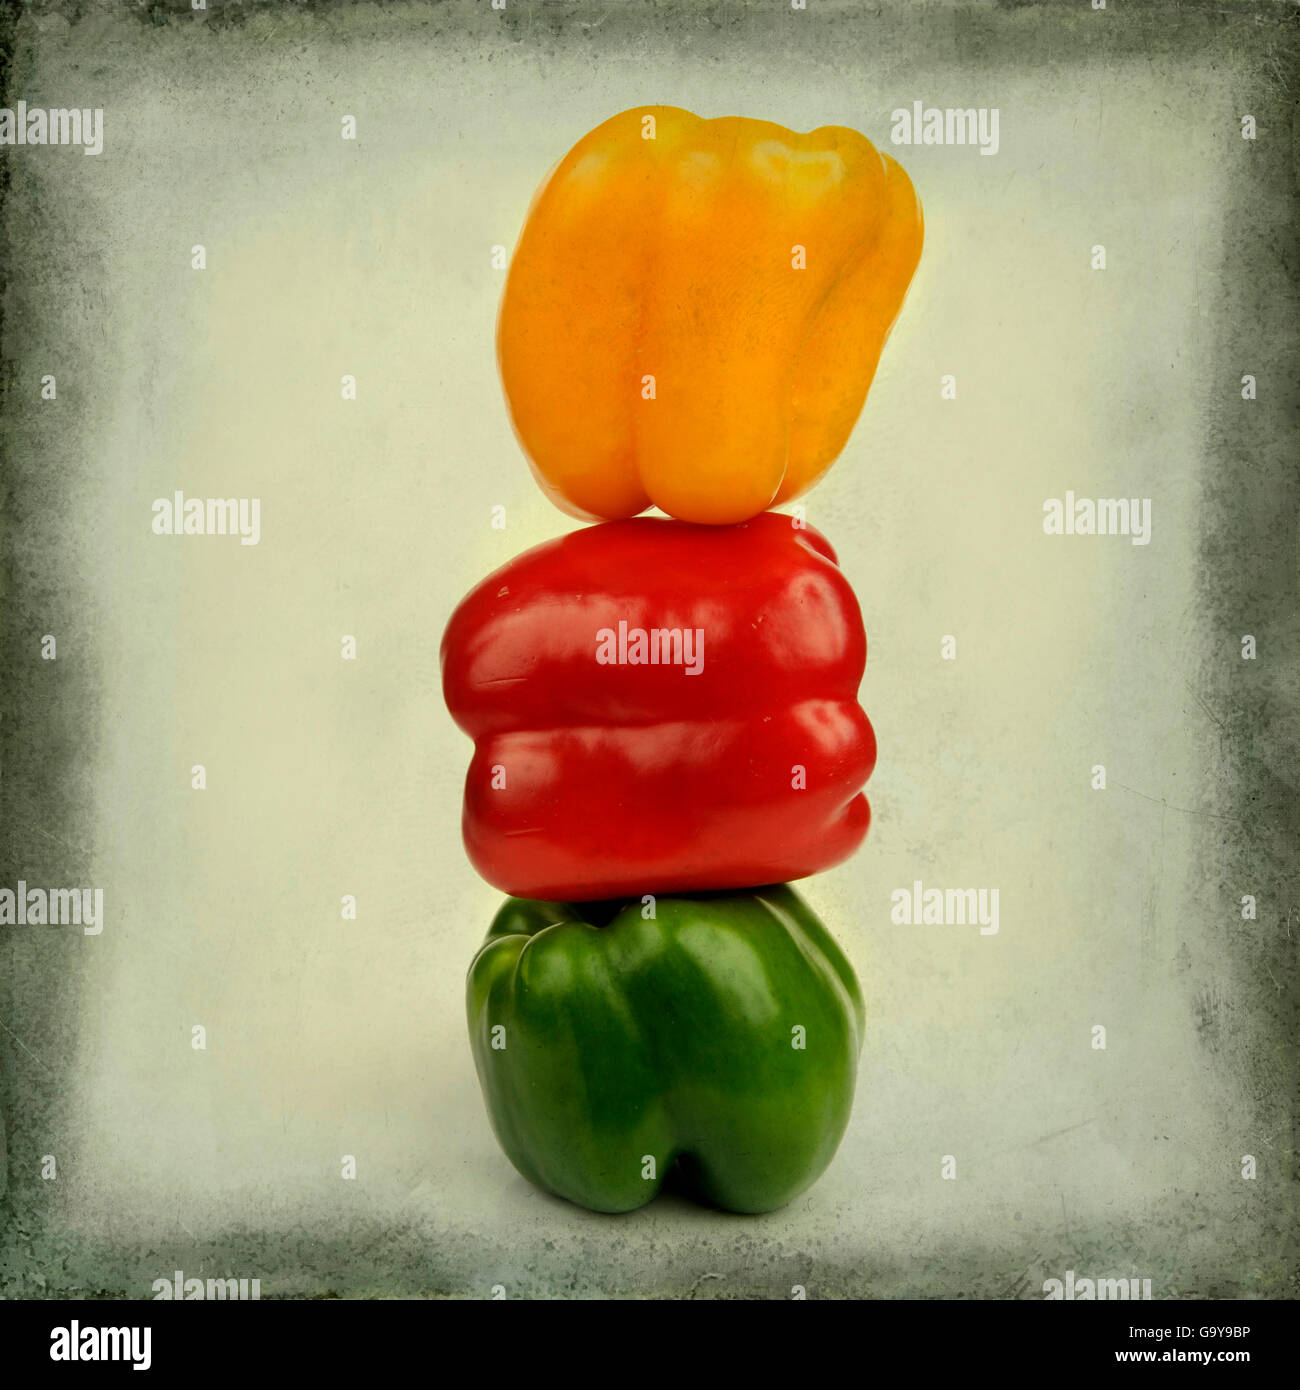 Yellow, red and green bell pepper Stock Photo